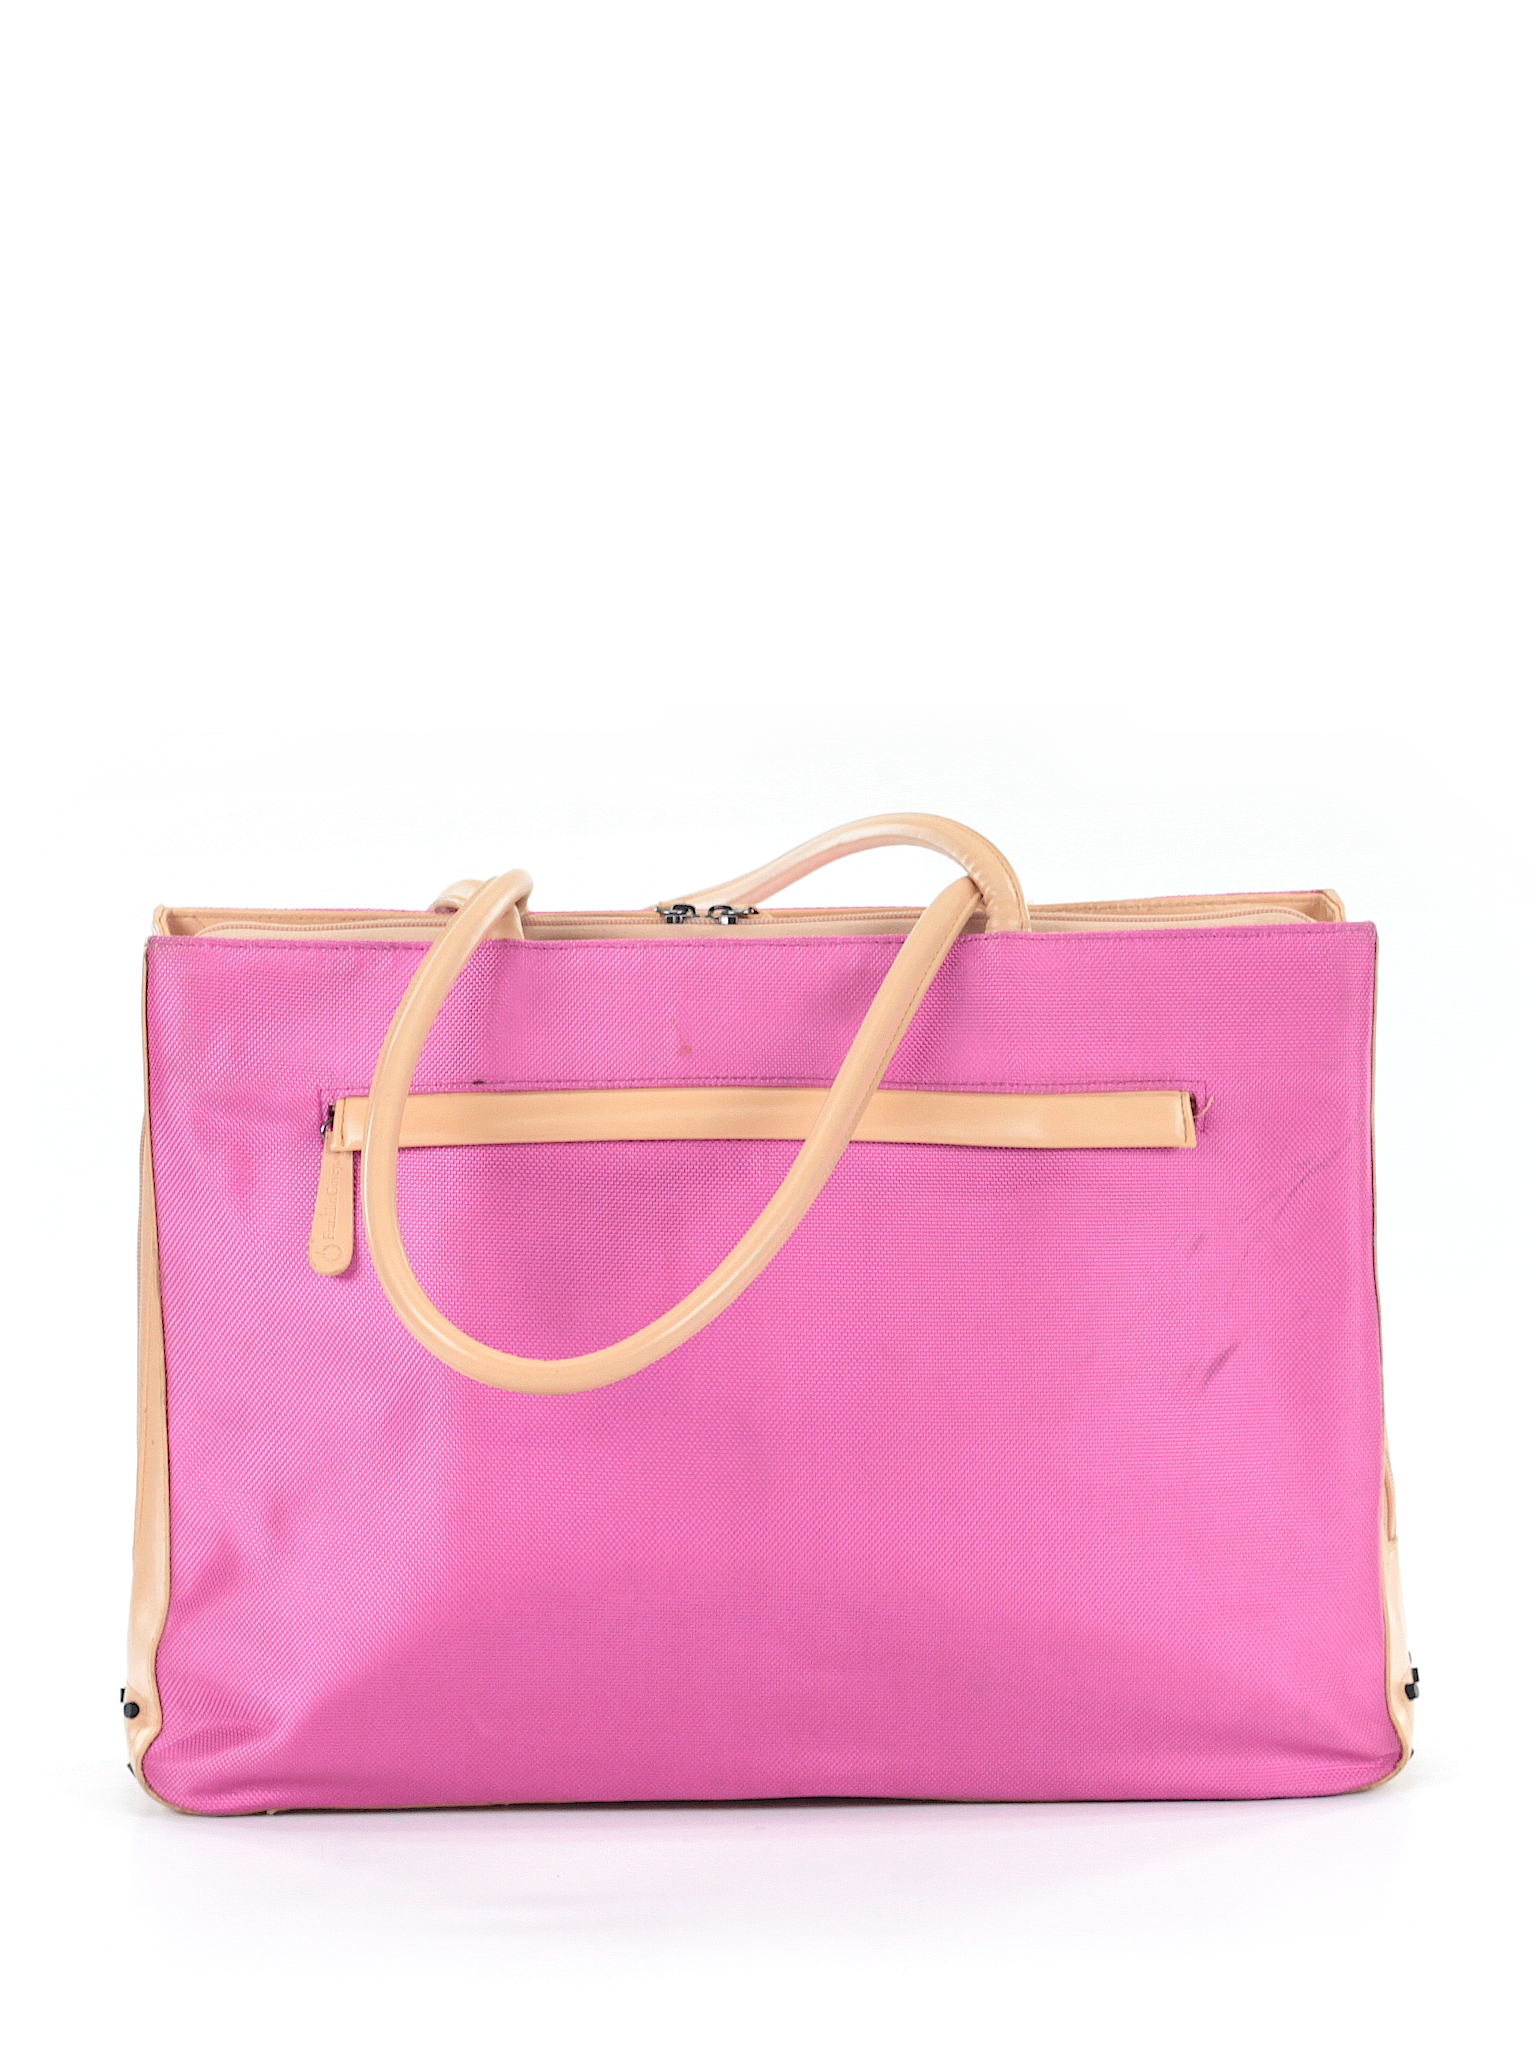 Franklin Covey Solid Pink Laptop Bag One Size - 69% off